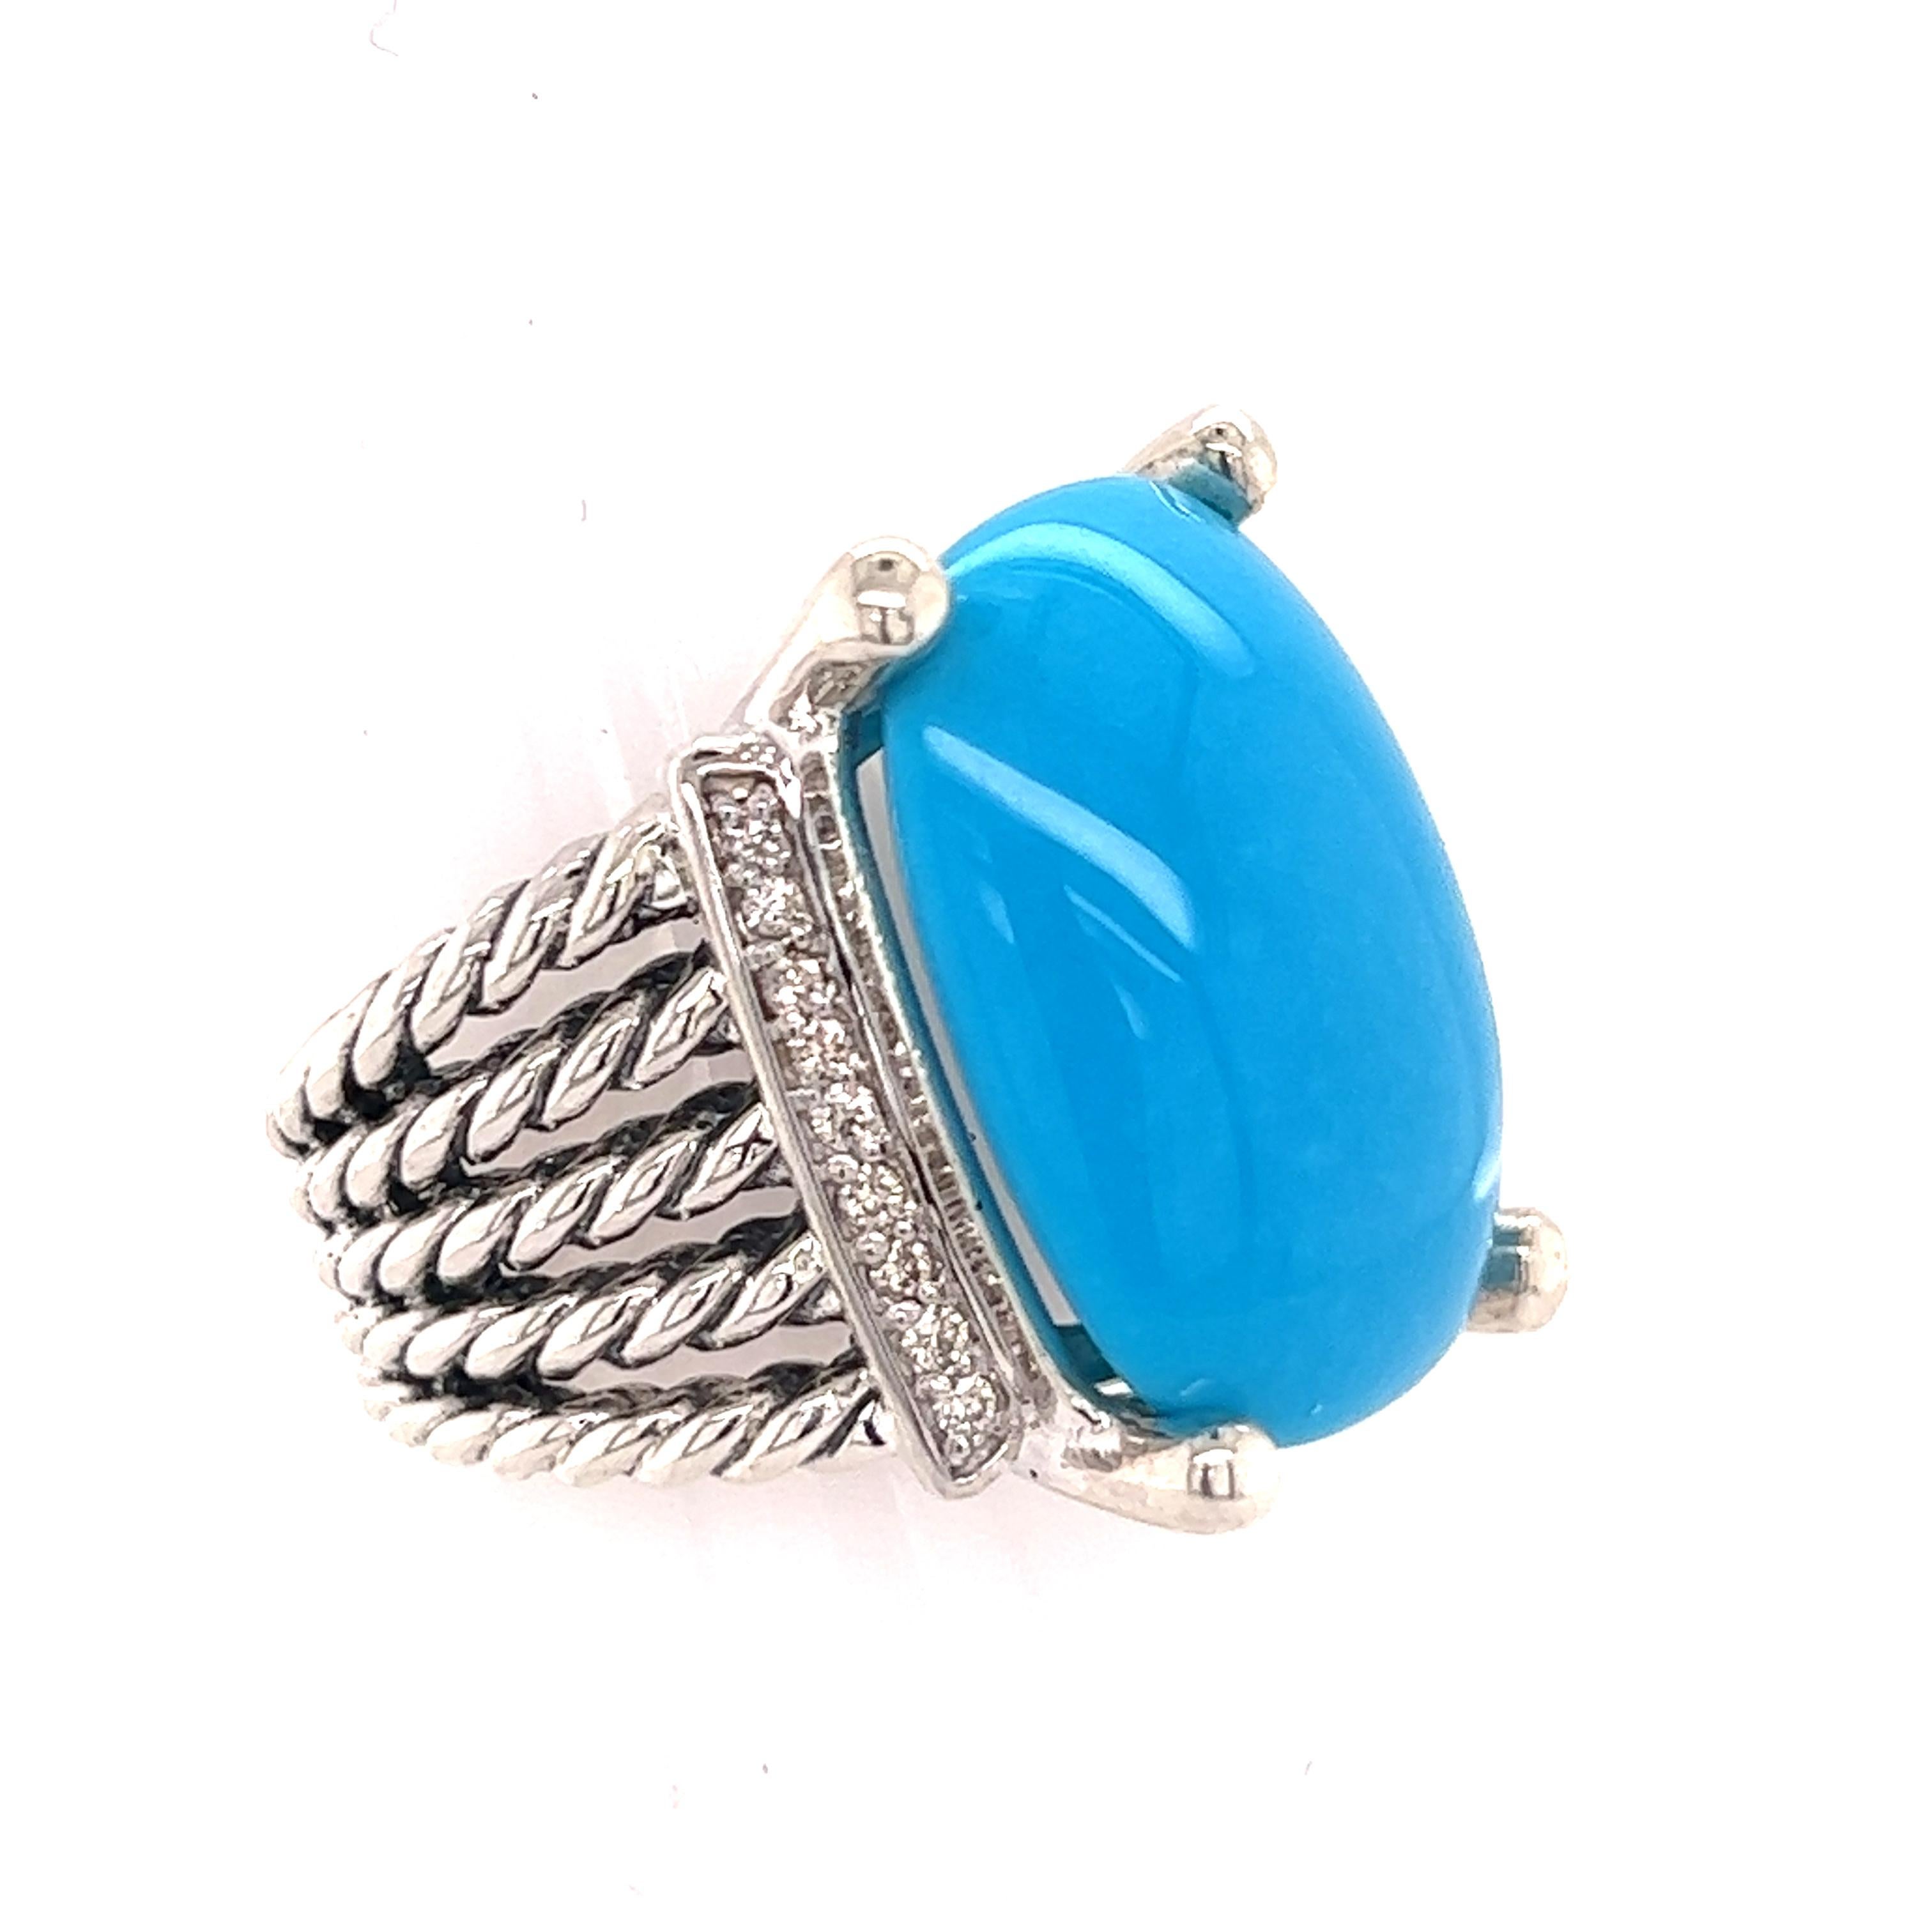 David Yurman Estate Turquoise Diamond Ring Sterling Silver 13.13 TCW DY59

This elegant Authentic David Yurman ring is made of sterling silver and has a weight of 9.63 grams.

TRUSTED SELLER SINCE 2002

PLEASE SEE OUR HUNDREDS OF POSITIVE FEEDBACKS